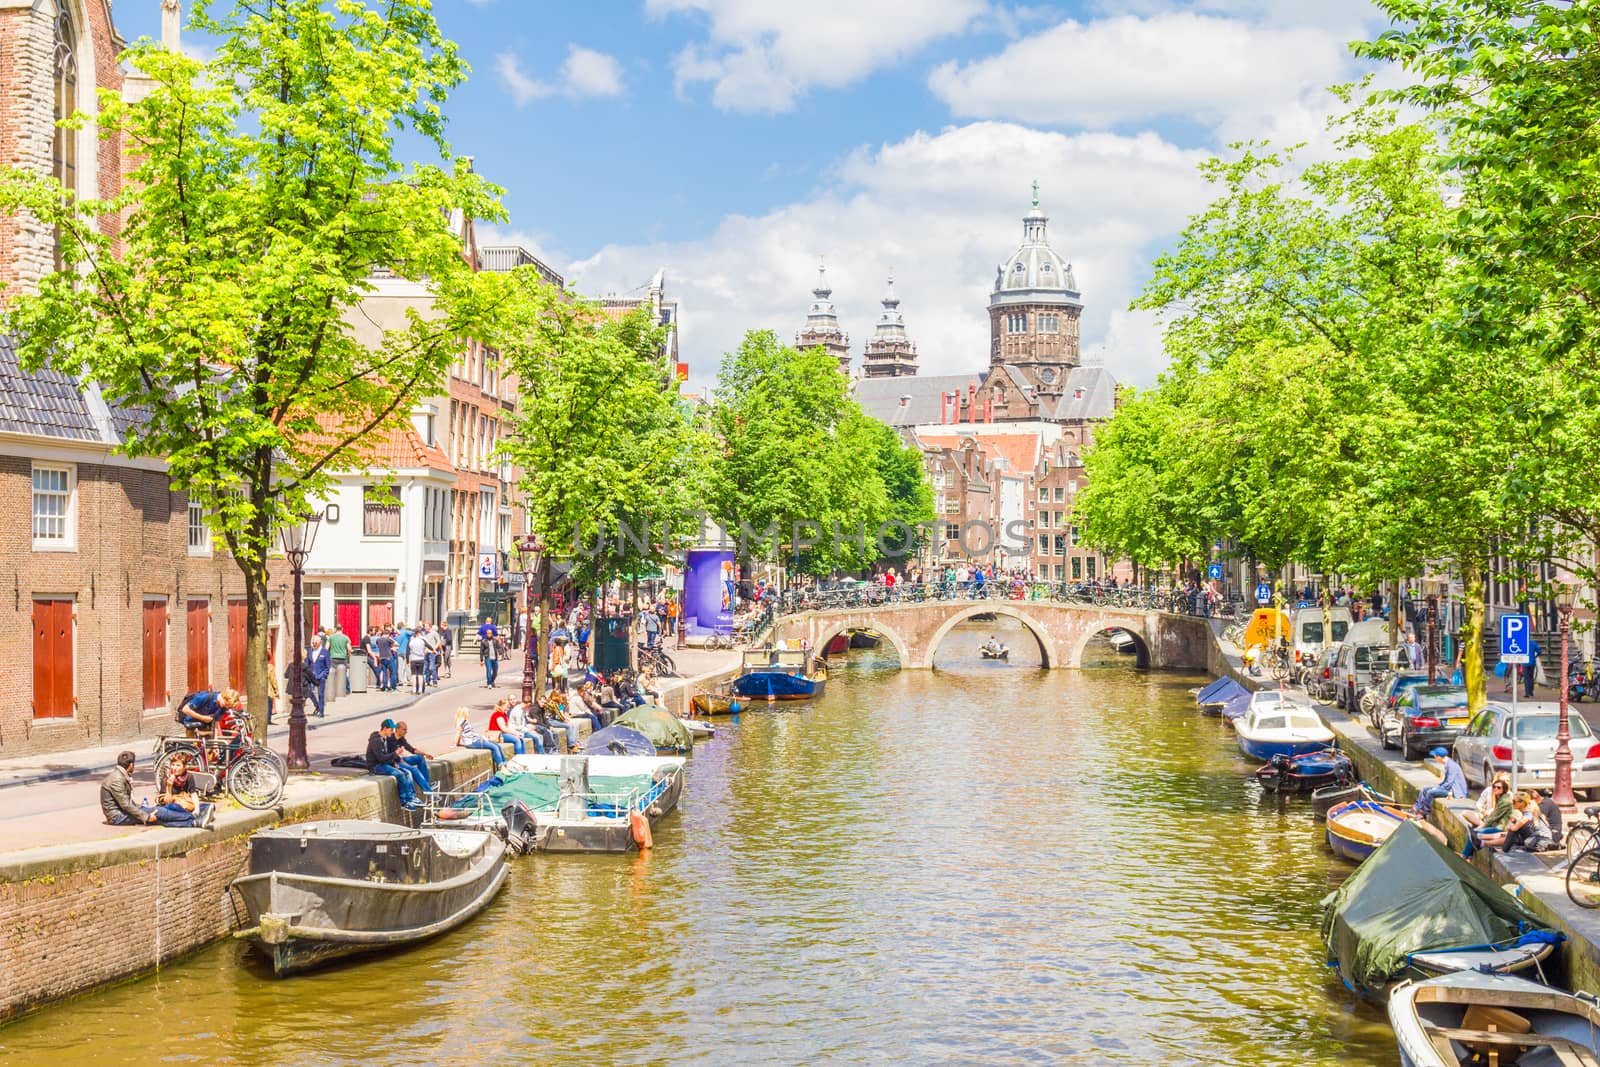 Tourists walking by a canal in Amsterdam. Amsterdam is the capital of the Netherlands and the canals and harbours fill a full quarter of the city surface.